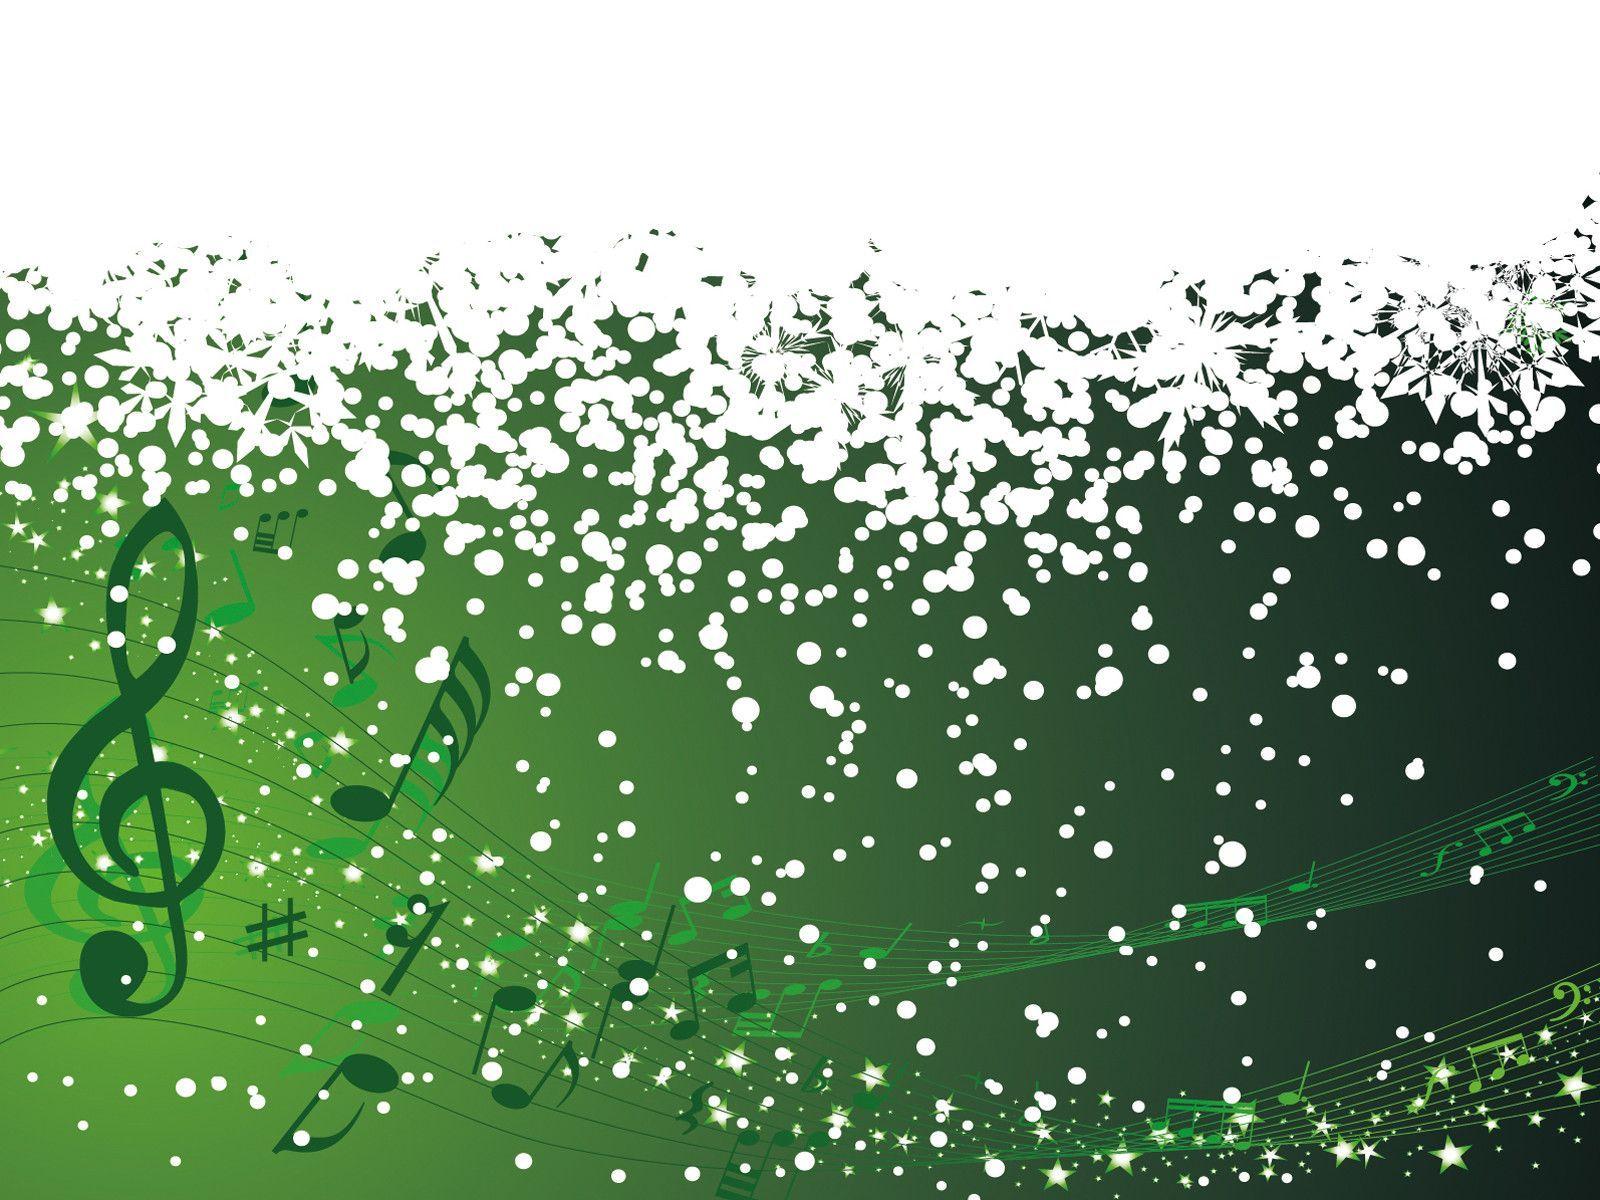 Musical Instrument Snow flakes PPT Background, Green